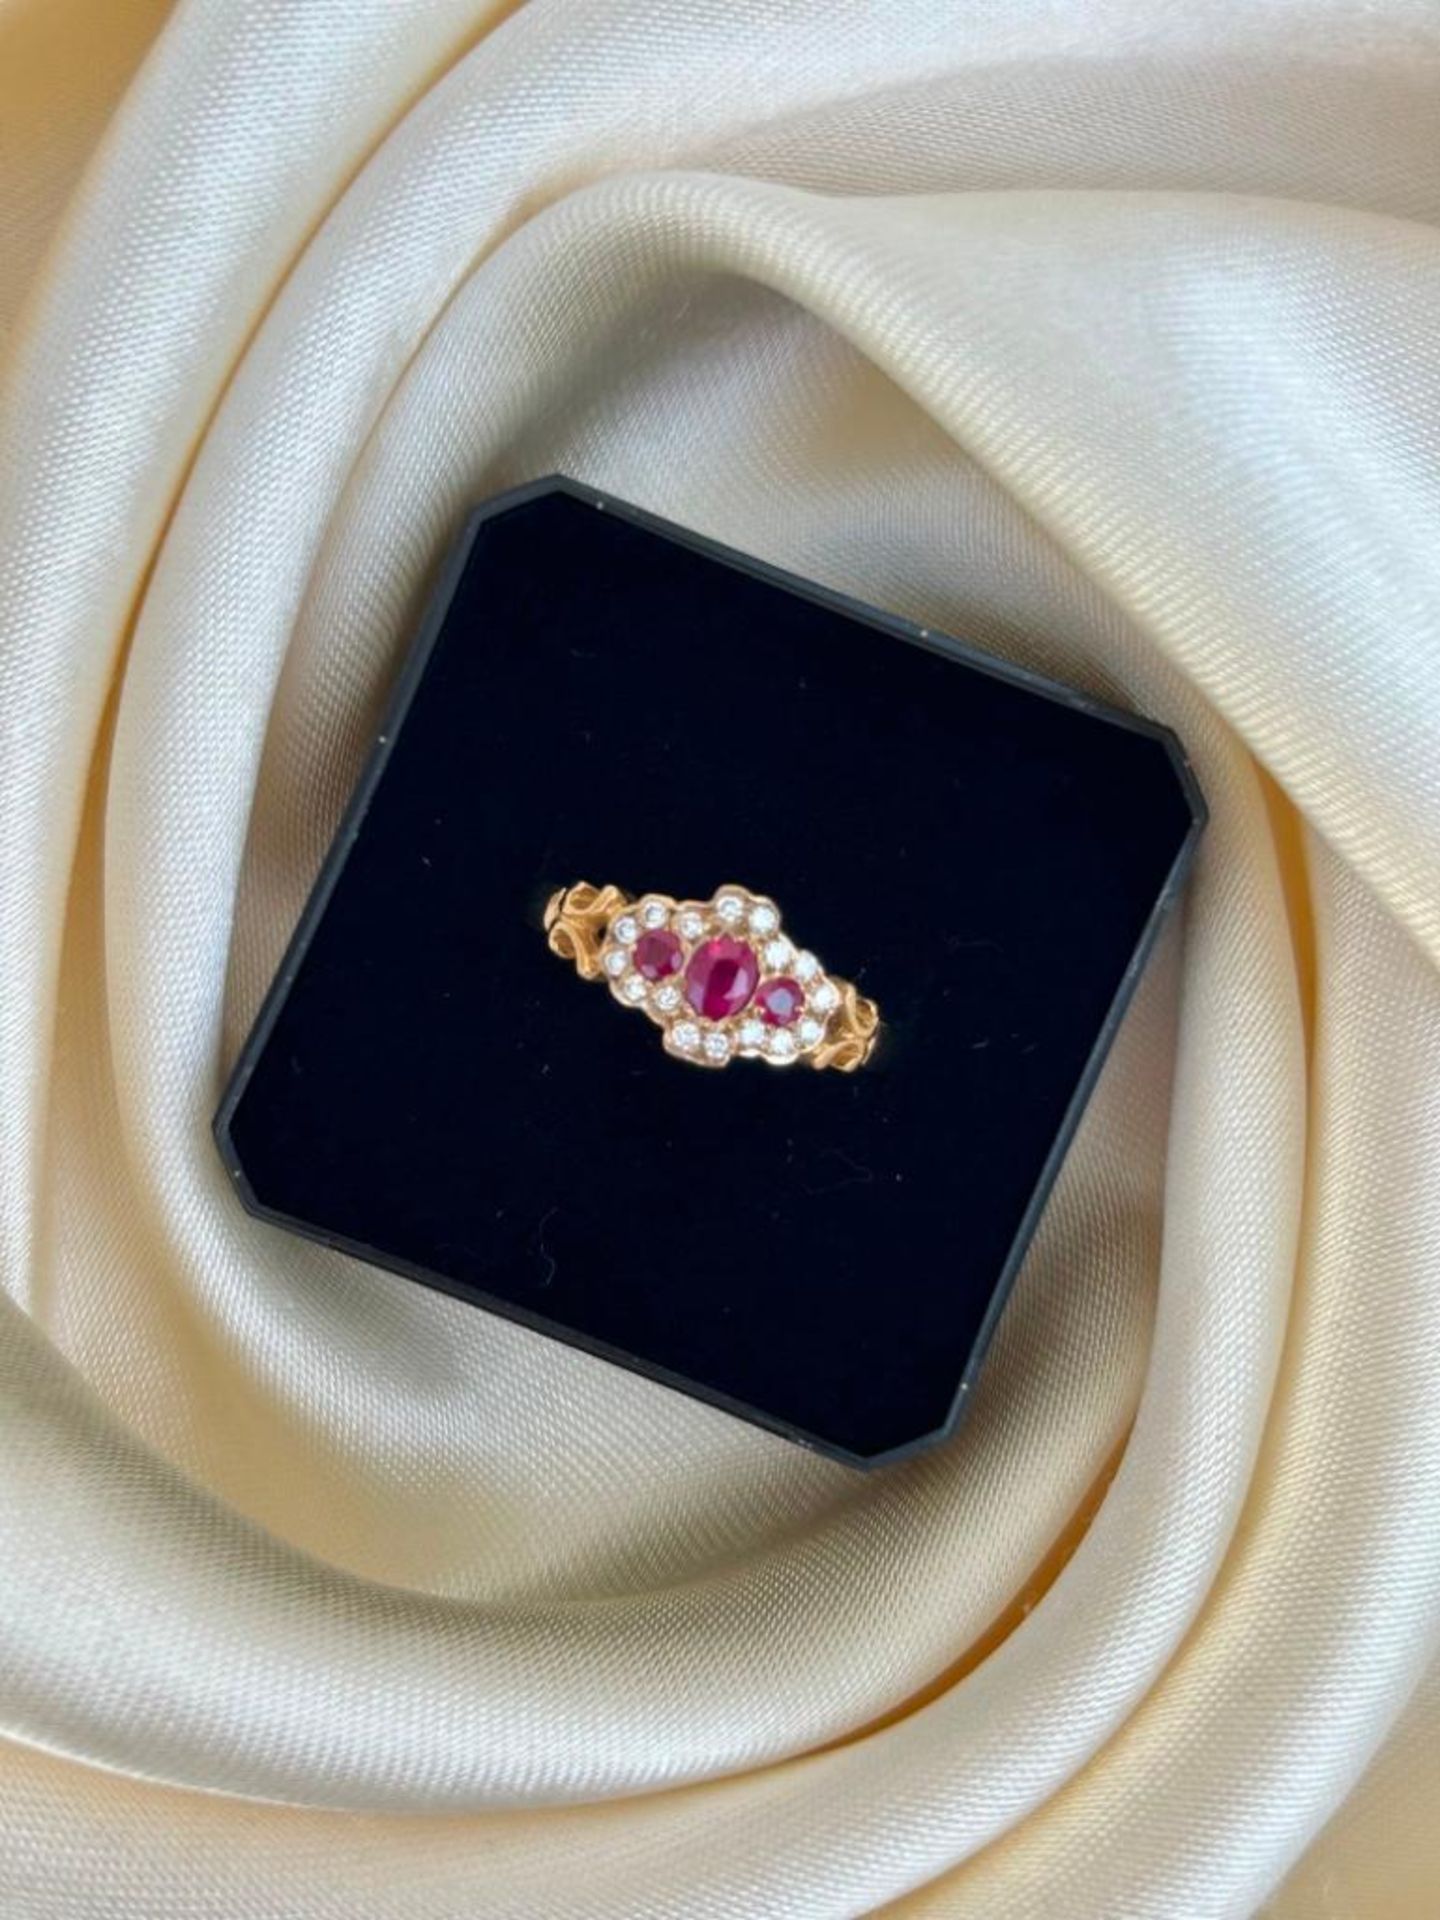 9ct Gold Ruby and Diamond Dress Ring - Image 3 of 6